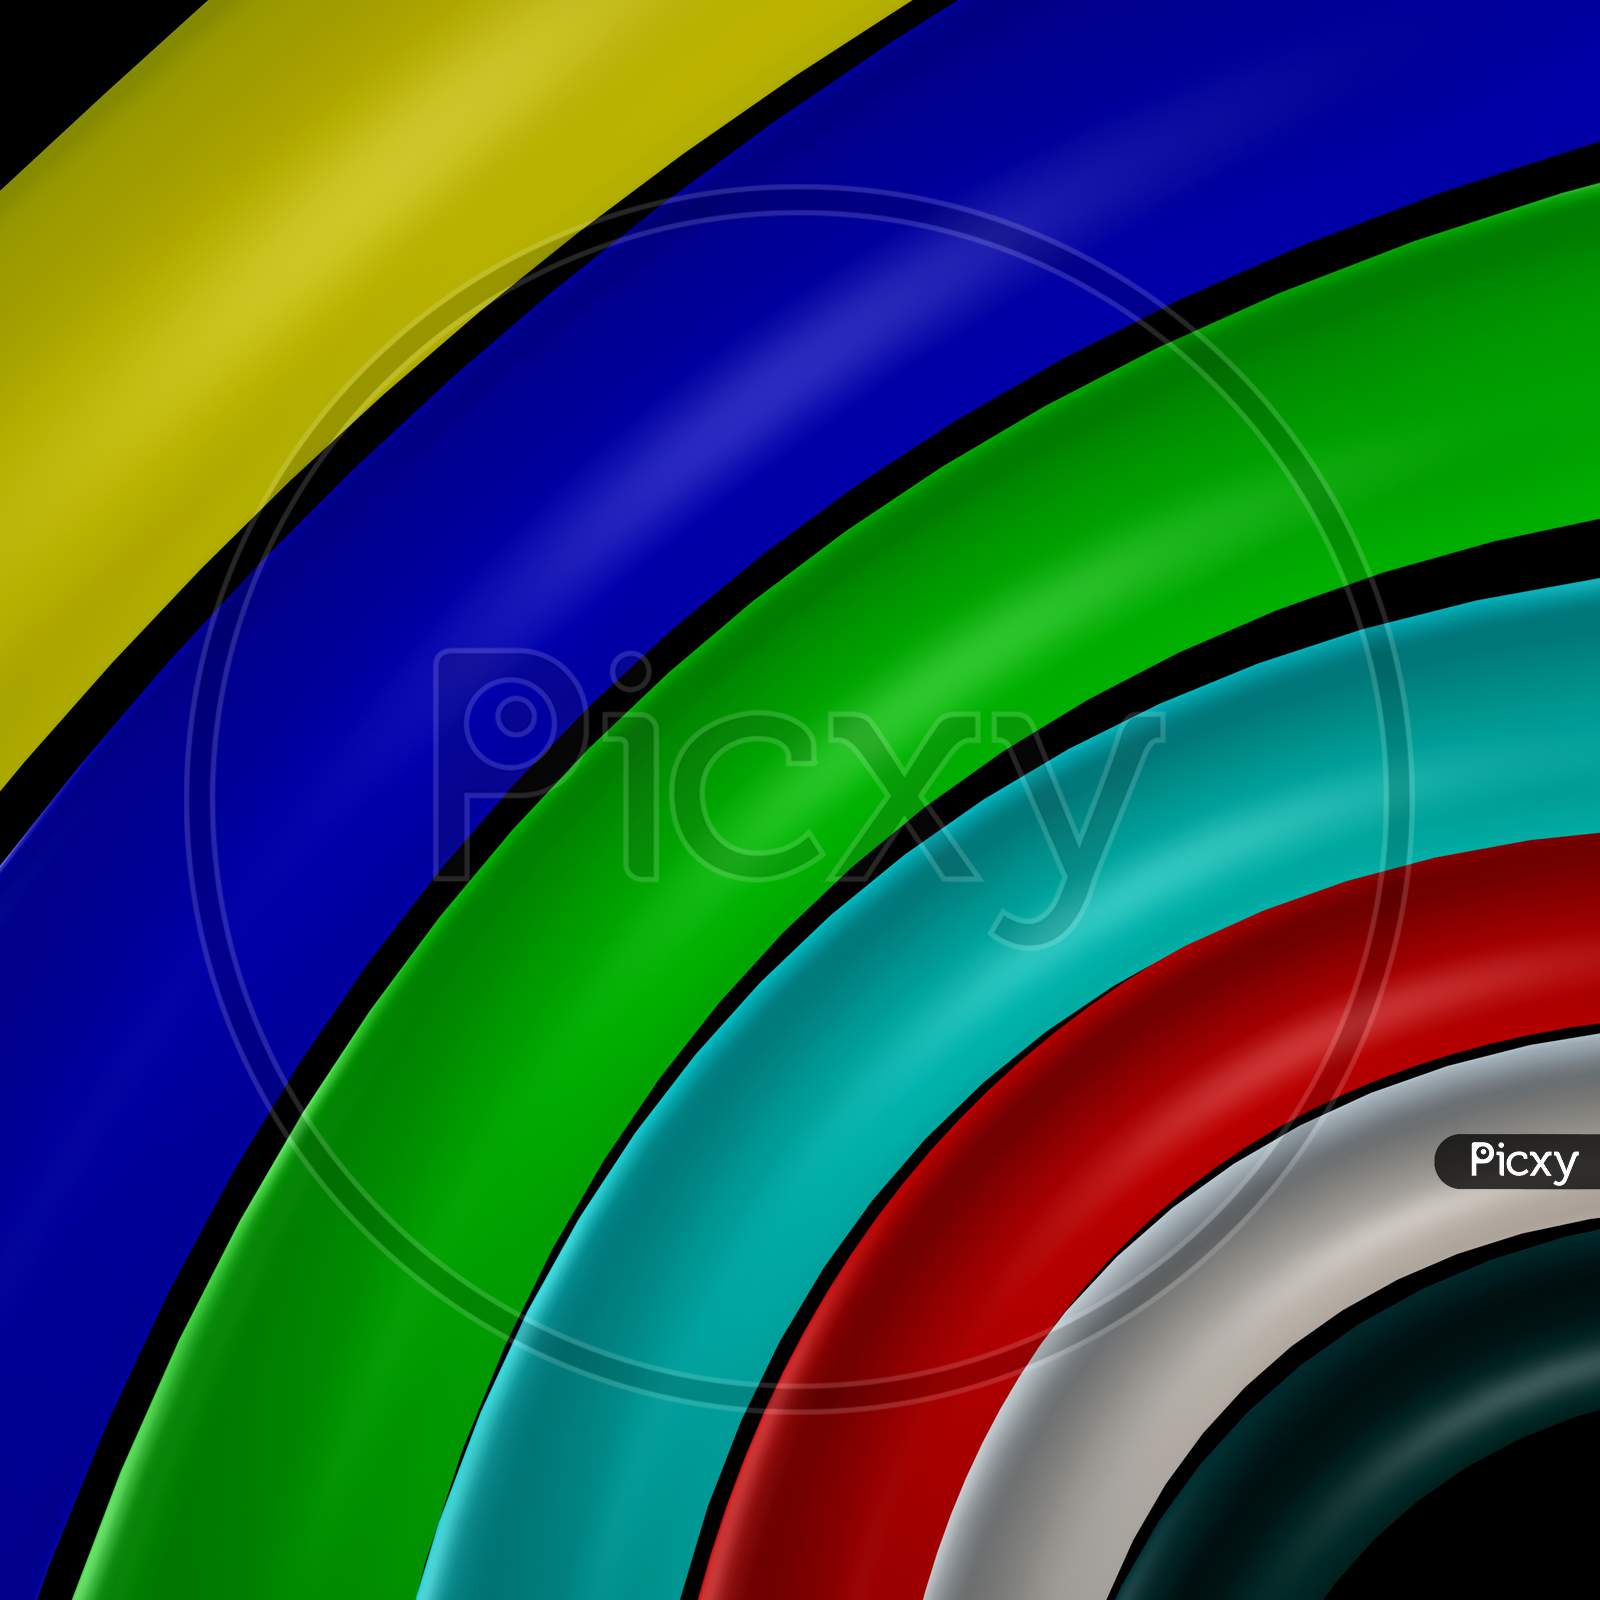 Colourful Rings With Patterns on Black Background